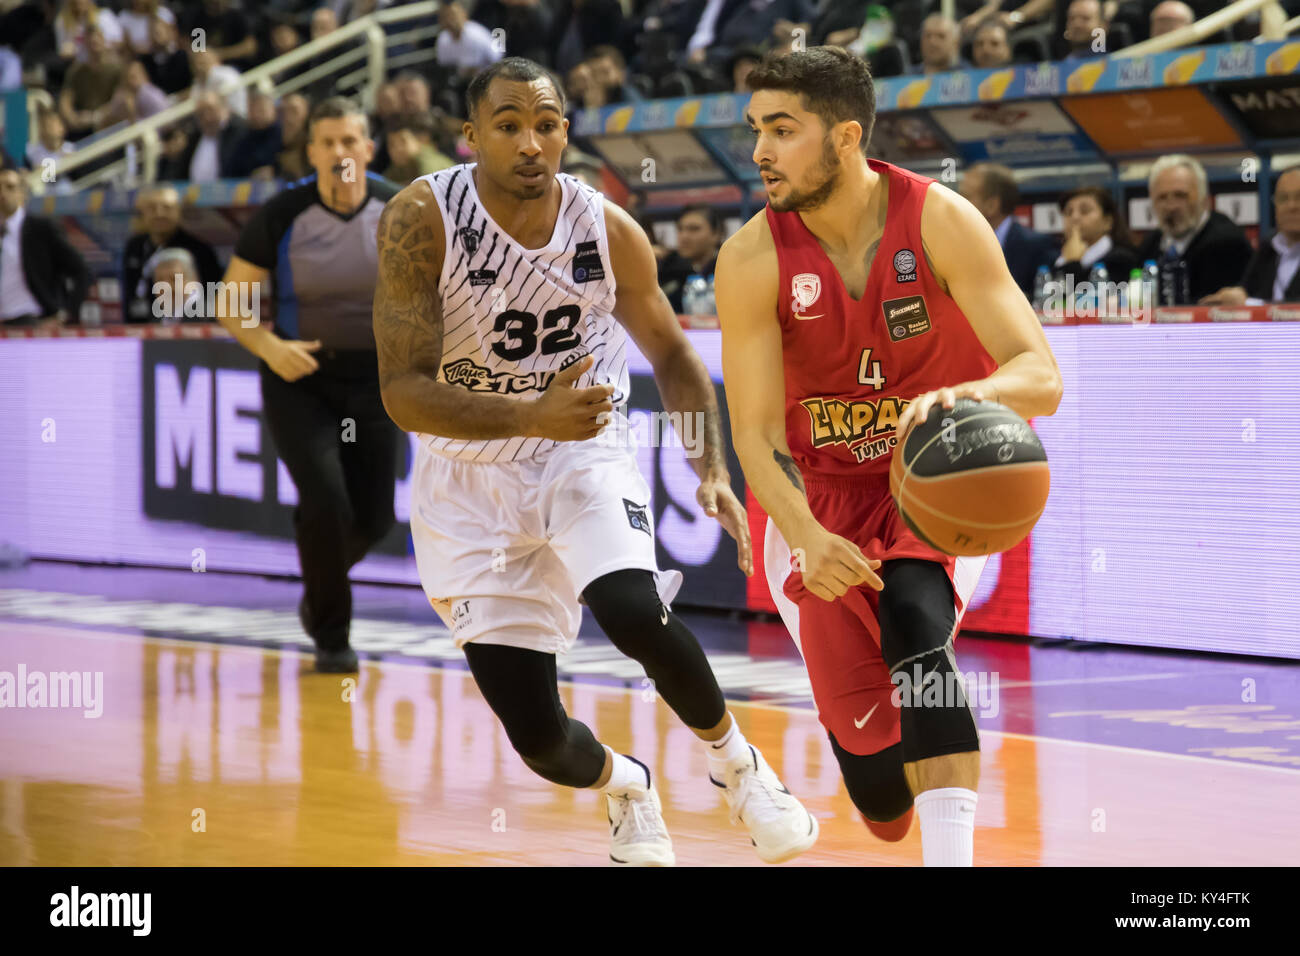 Thessaloniki, Greece, January 7, 2018: Player of Olympiacos Vassilis  Toliopoulos (R) and player of PAOK Phillip Goss (L) in action during the  Greek Ba Stock Photo - Alamy